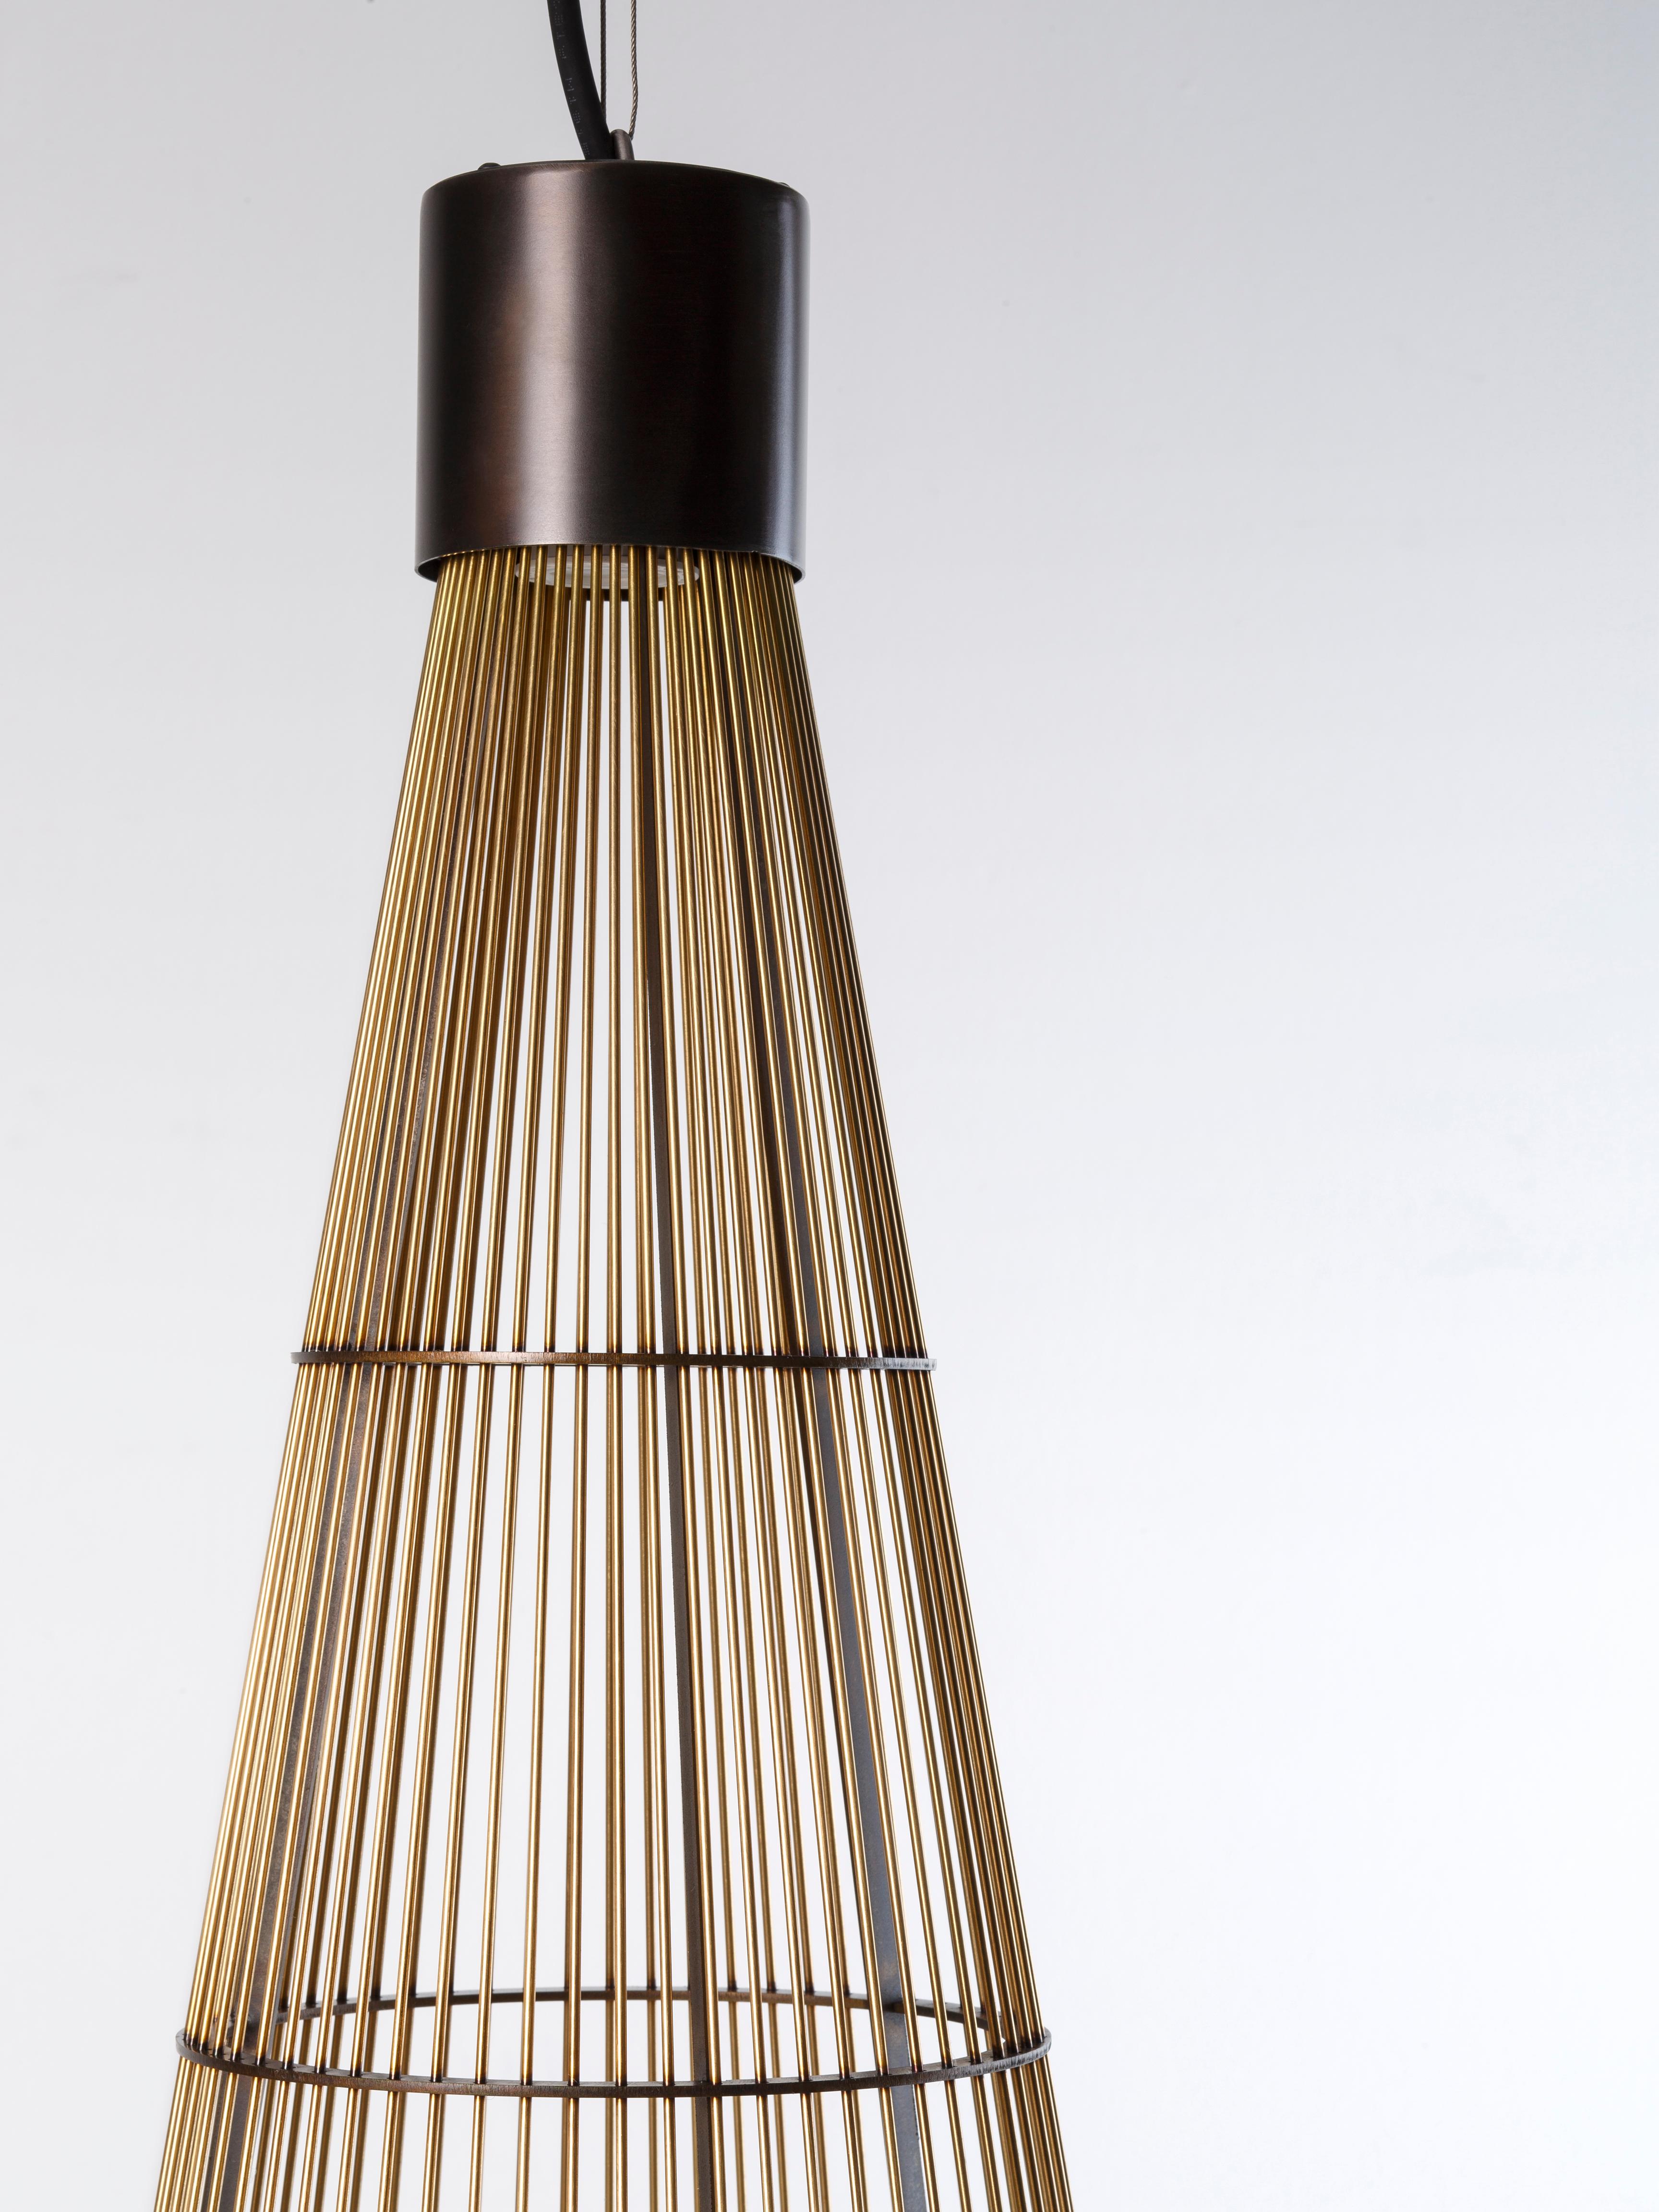 An iron and brass cone forms a sunburst to outline and expand light, defining its consistency, exploring new formal boundaries. Luce Solida is a lightweight lamp, built around a ‘shade’ made of small metal rods placed side by side, dematerializing